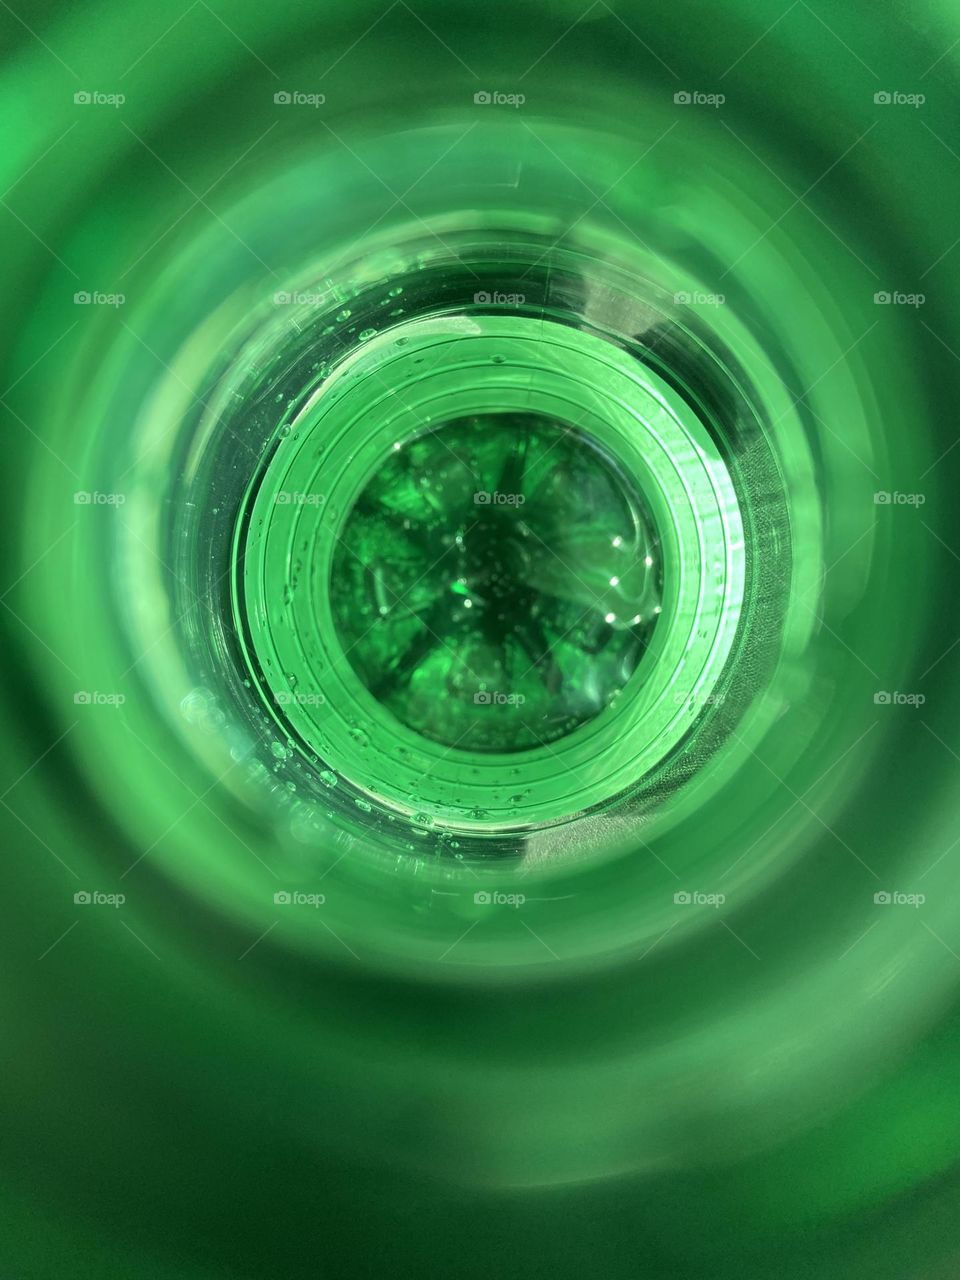 Looking into the top of a green bottle of San Pellegrino sparkling water. The rim of the bottle makes a green circular pattern of varying shades that is simply beautiful, and the water is a darker focal point in the center. Art is everywhere. 